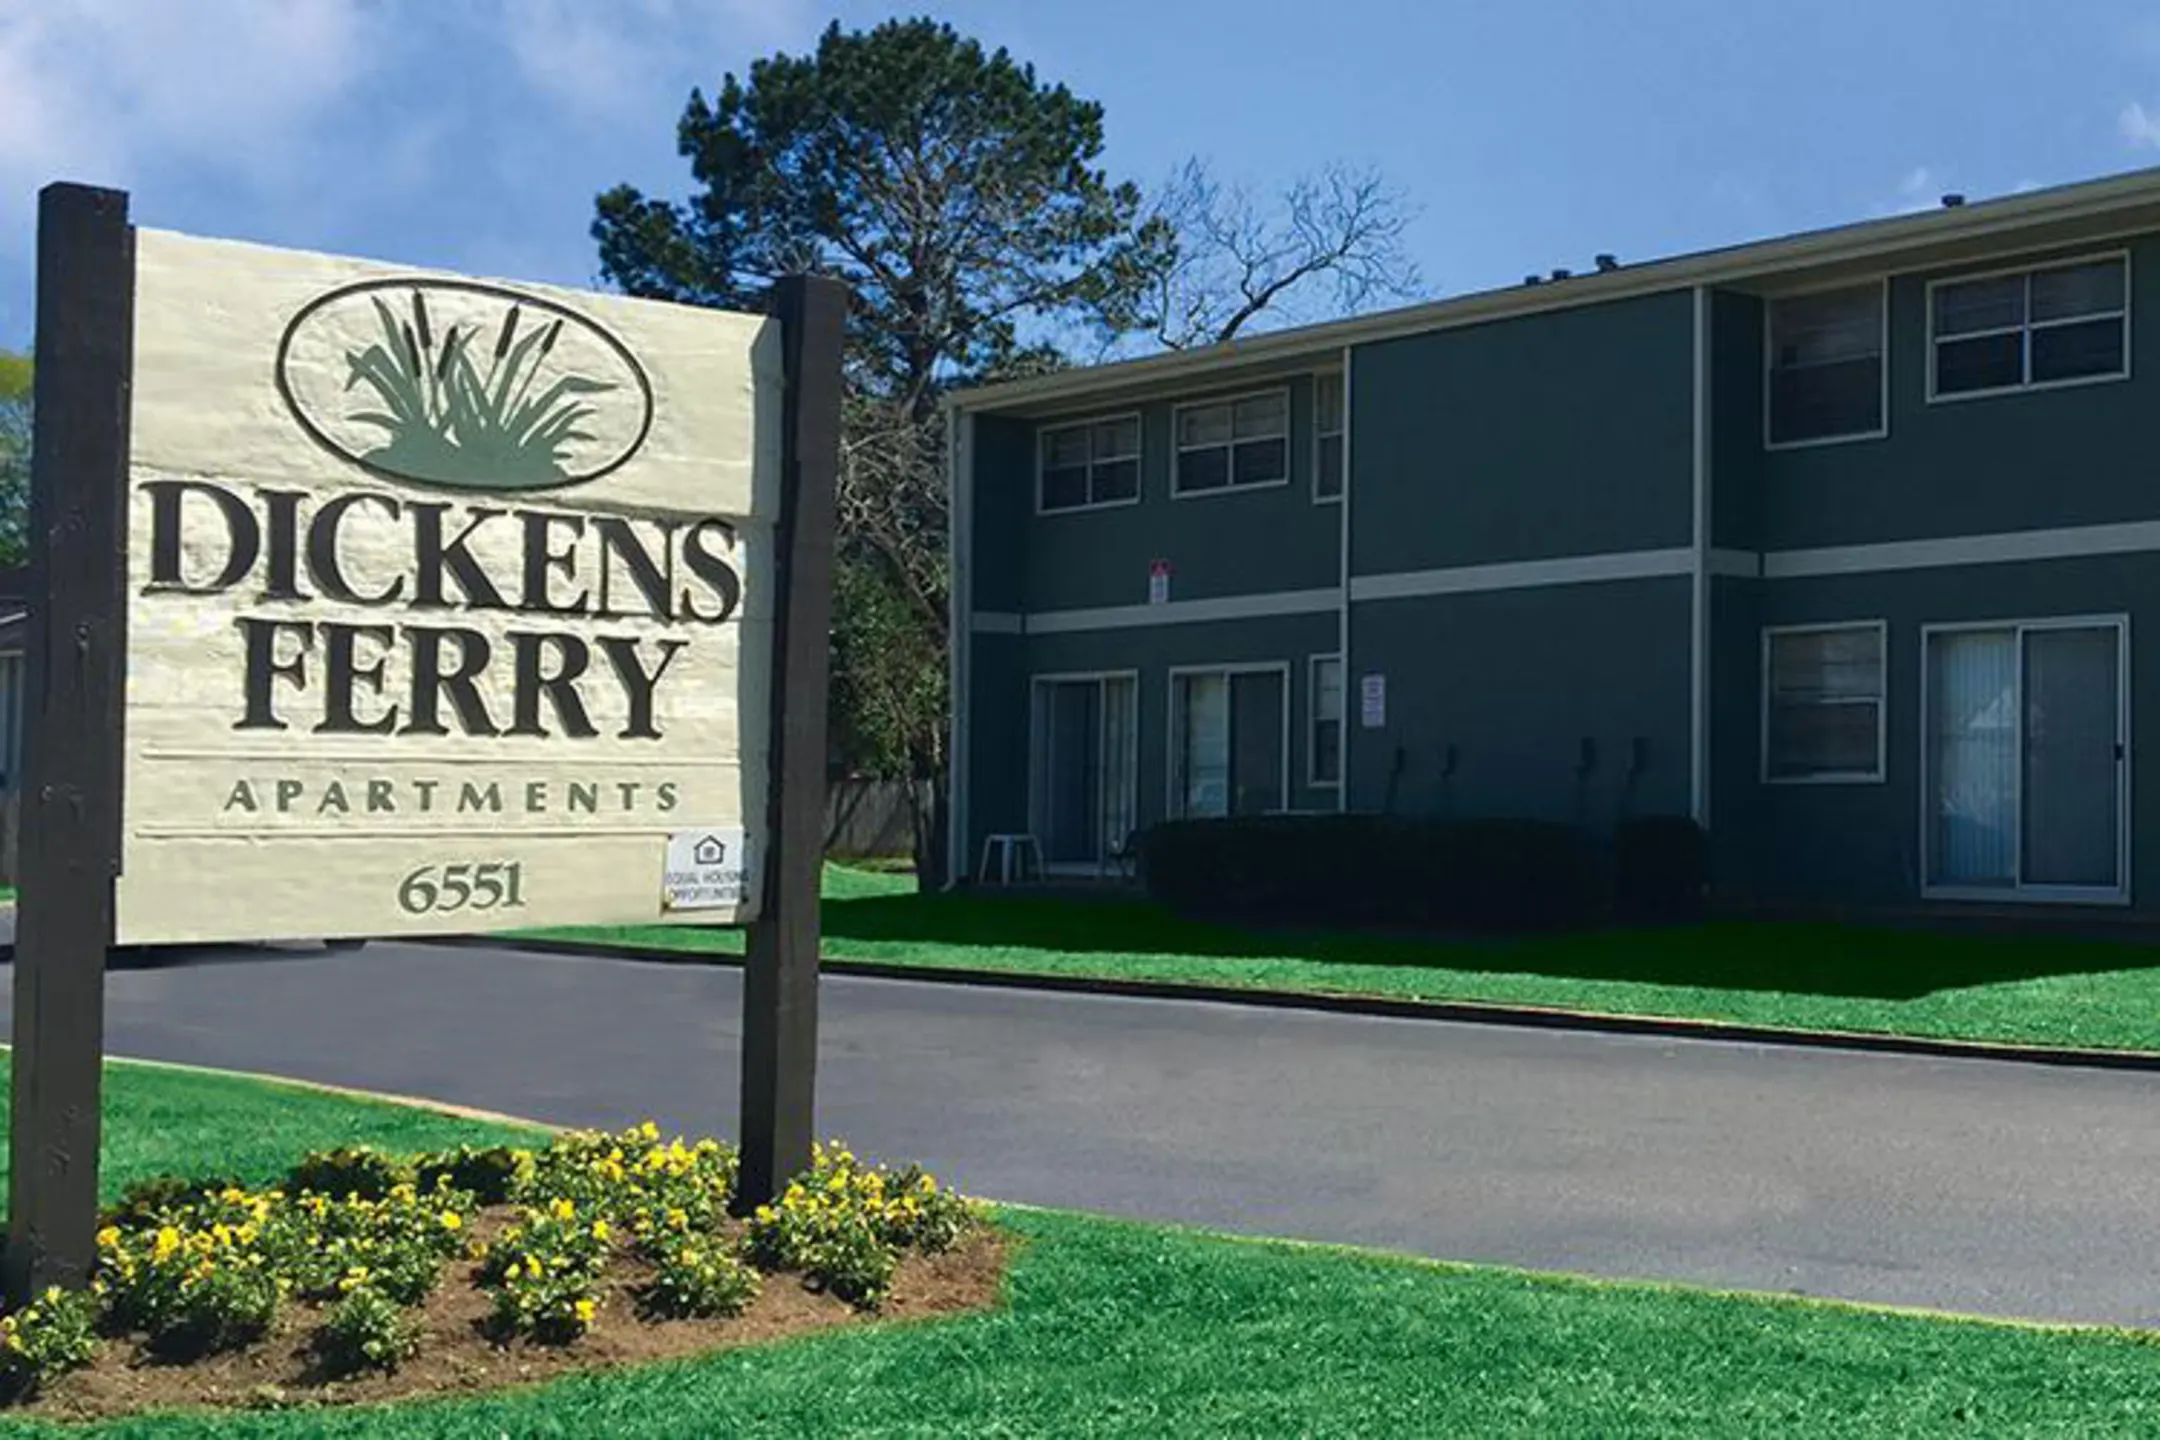 Building - Dickens Ferry Apartments - Mobile, AL